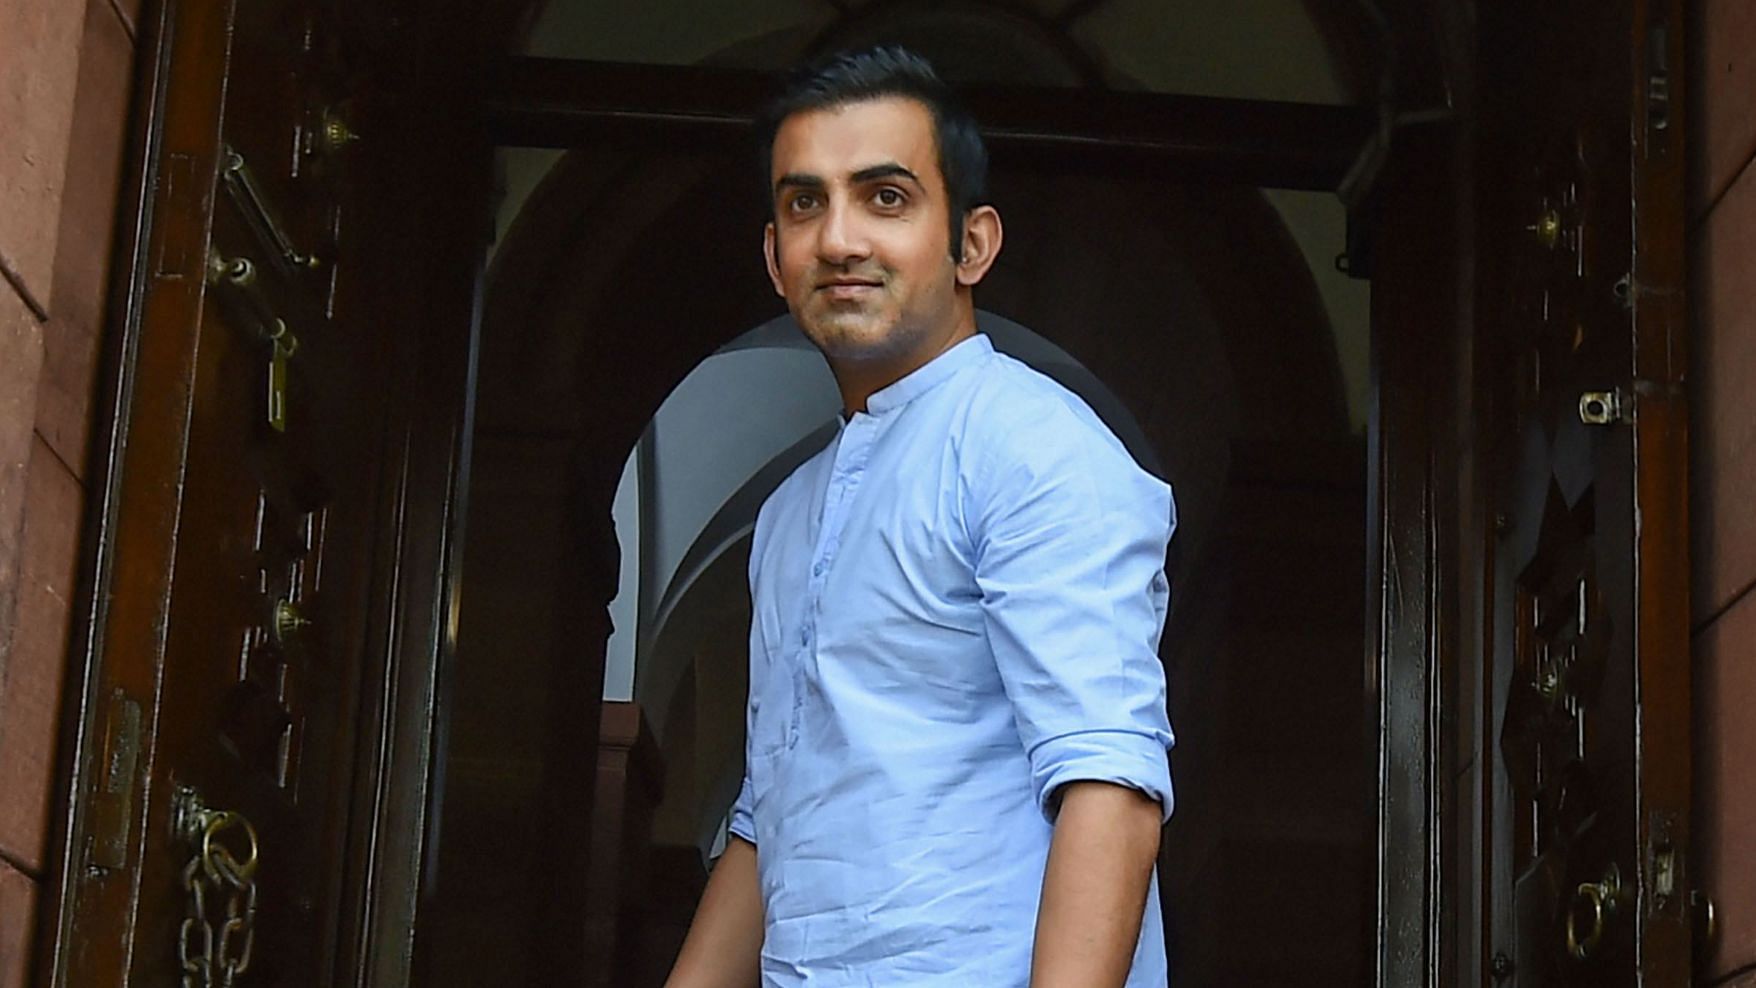 Gautam Gambhir had earlier released Rs 1 crore out of his MP Local Area Development Scheme (MPLADS) towards the relief efforts.